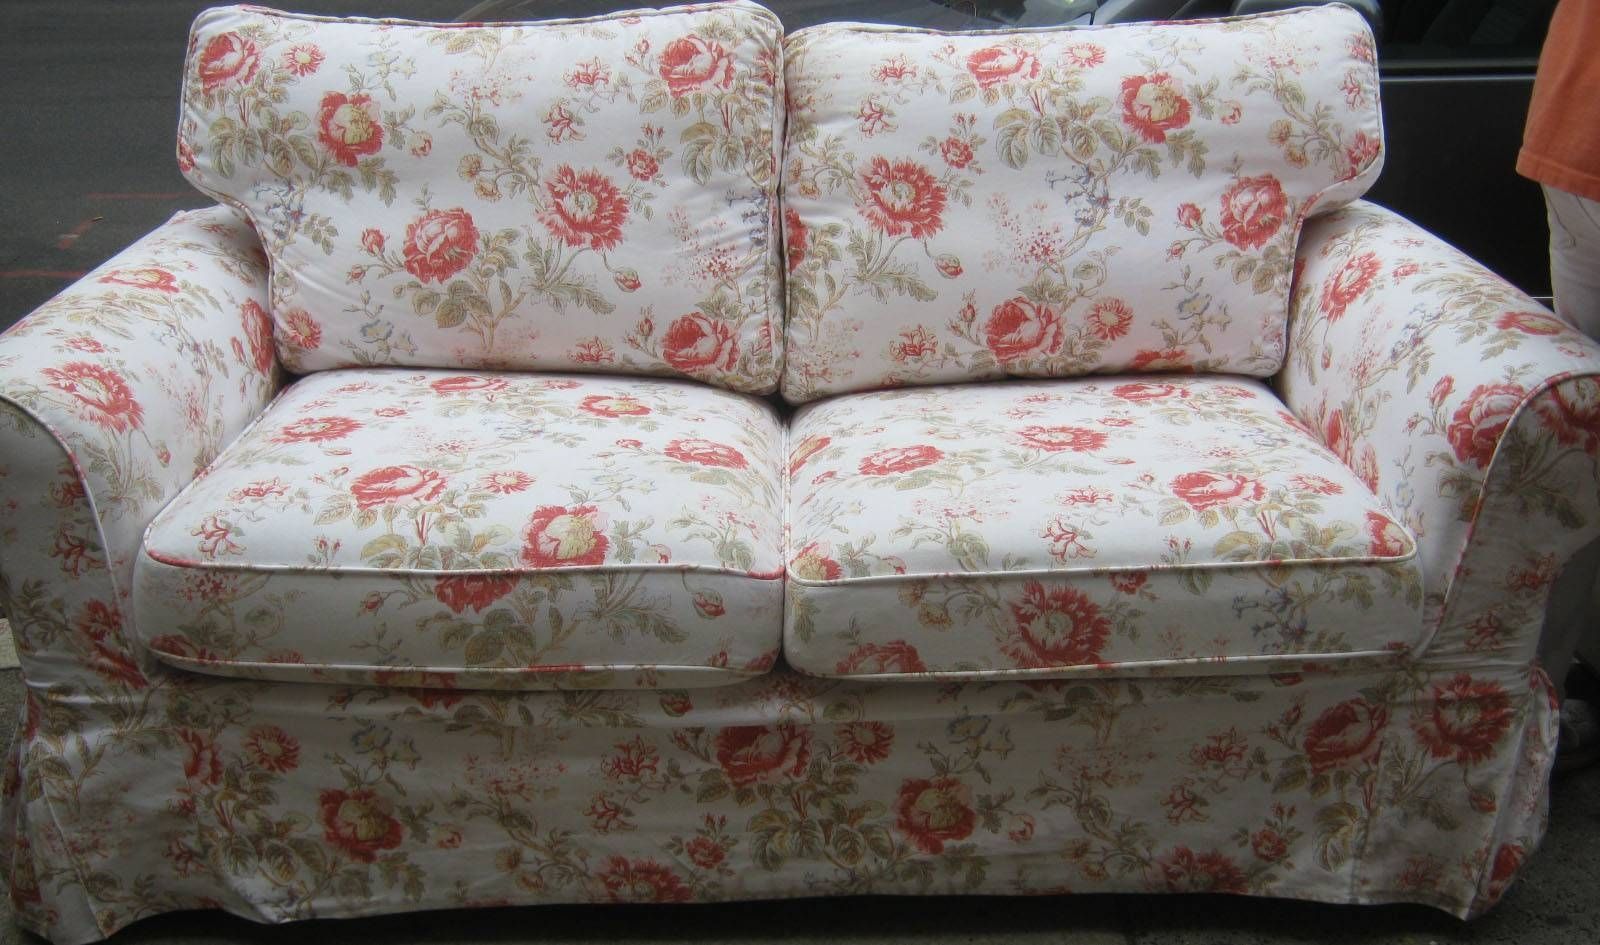 Love Seat Slip Covers For Stunning Outlook In The Living Room Intended For Patterned Sofa Slipcovers (View 9 of 15)